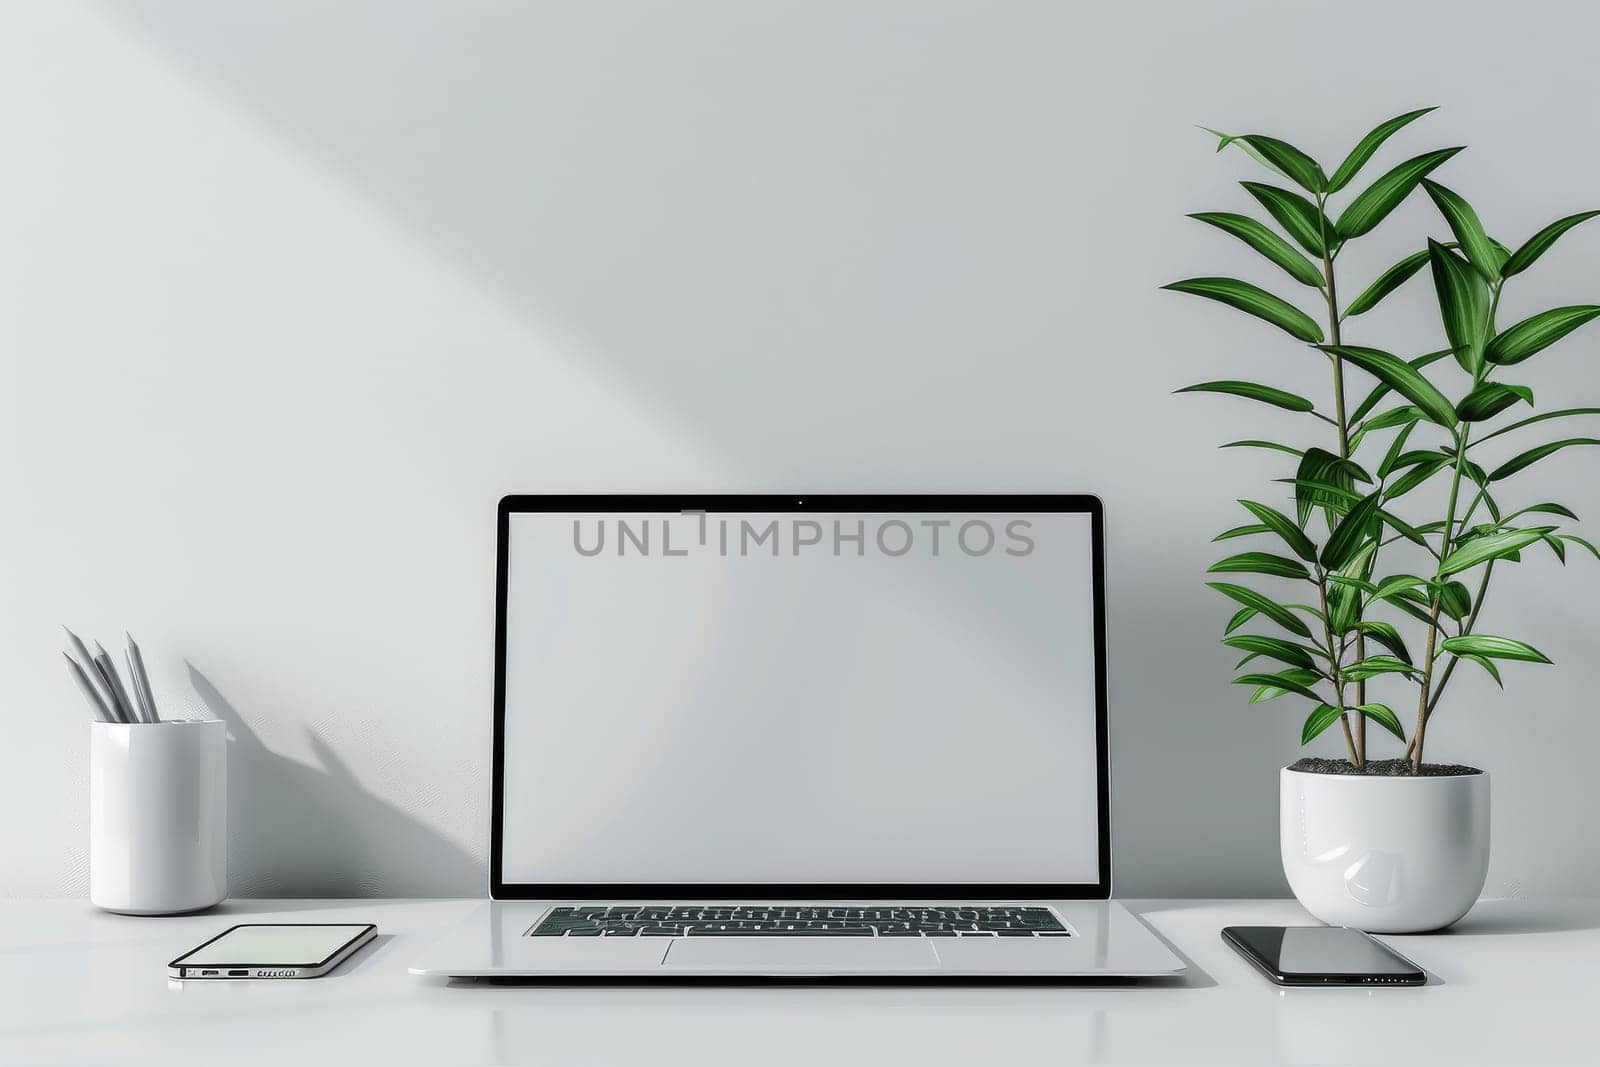 A laptop sits on a desk next to a potted plant and a white phone. The laptop is open and the screen is blank, giving the impression of a clean and organized workspace